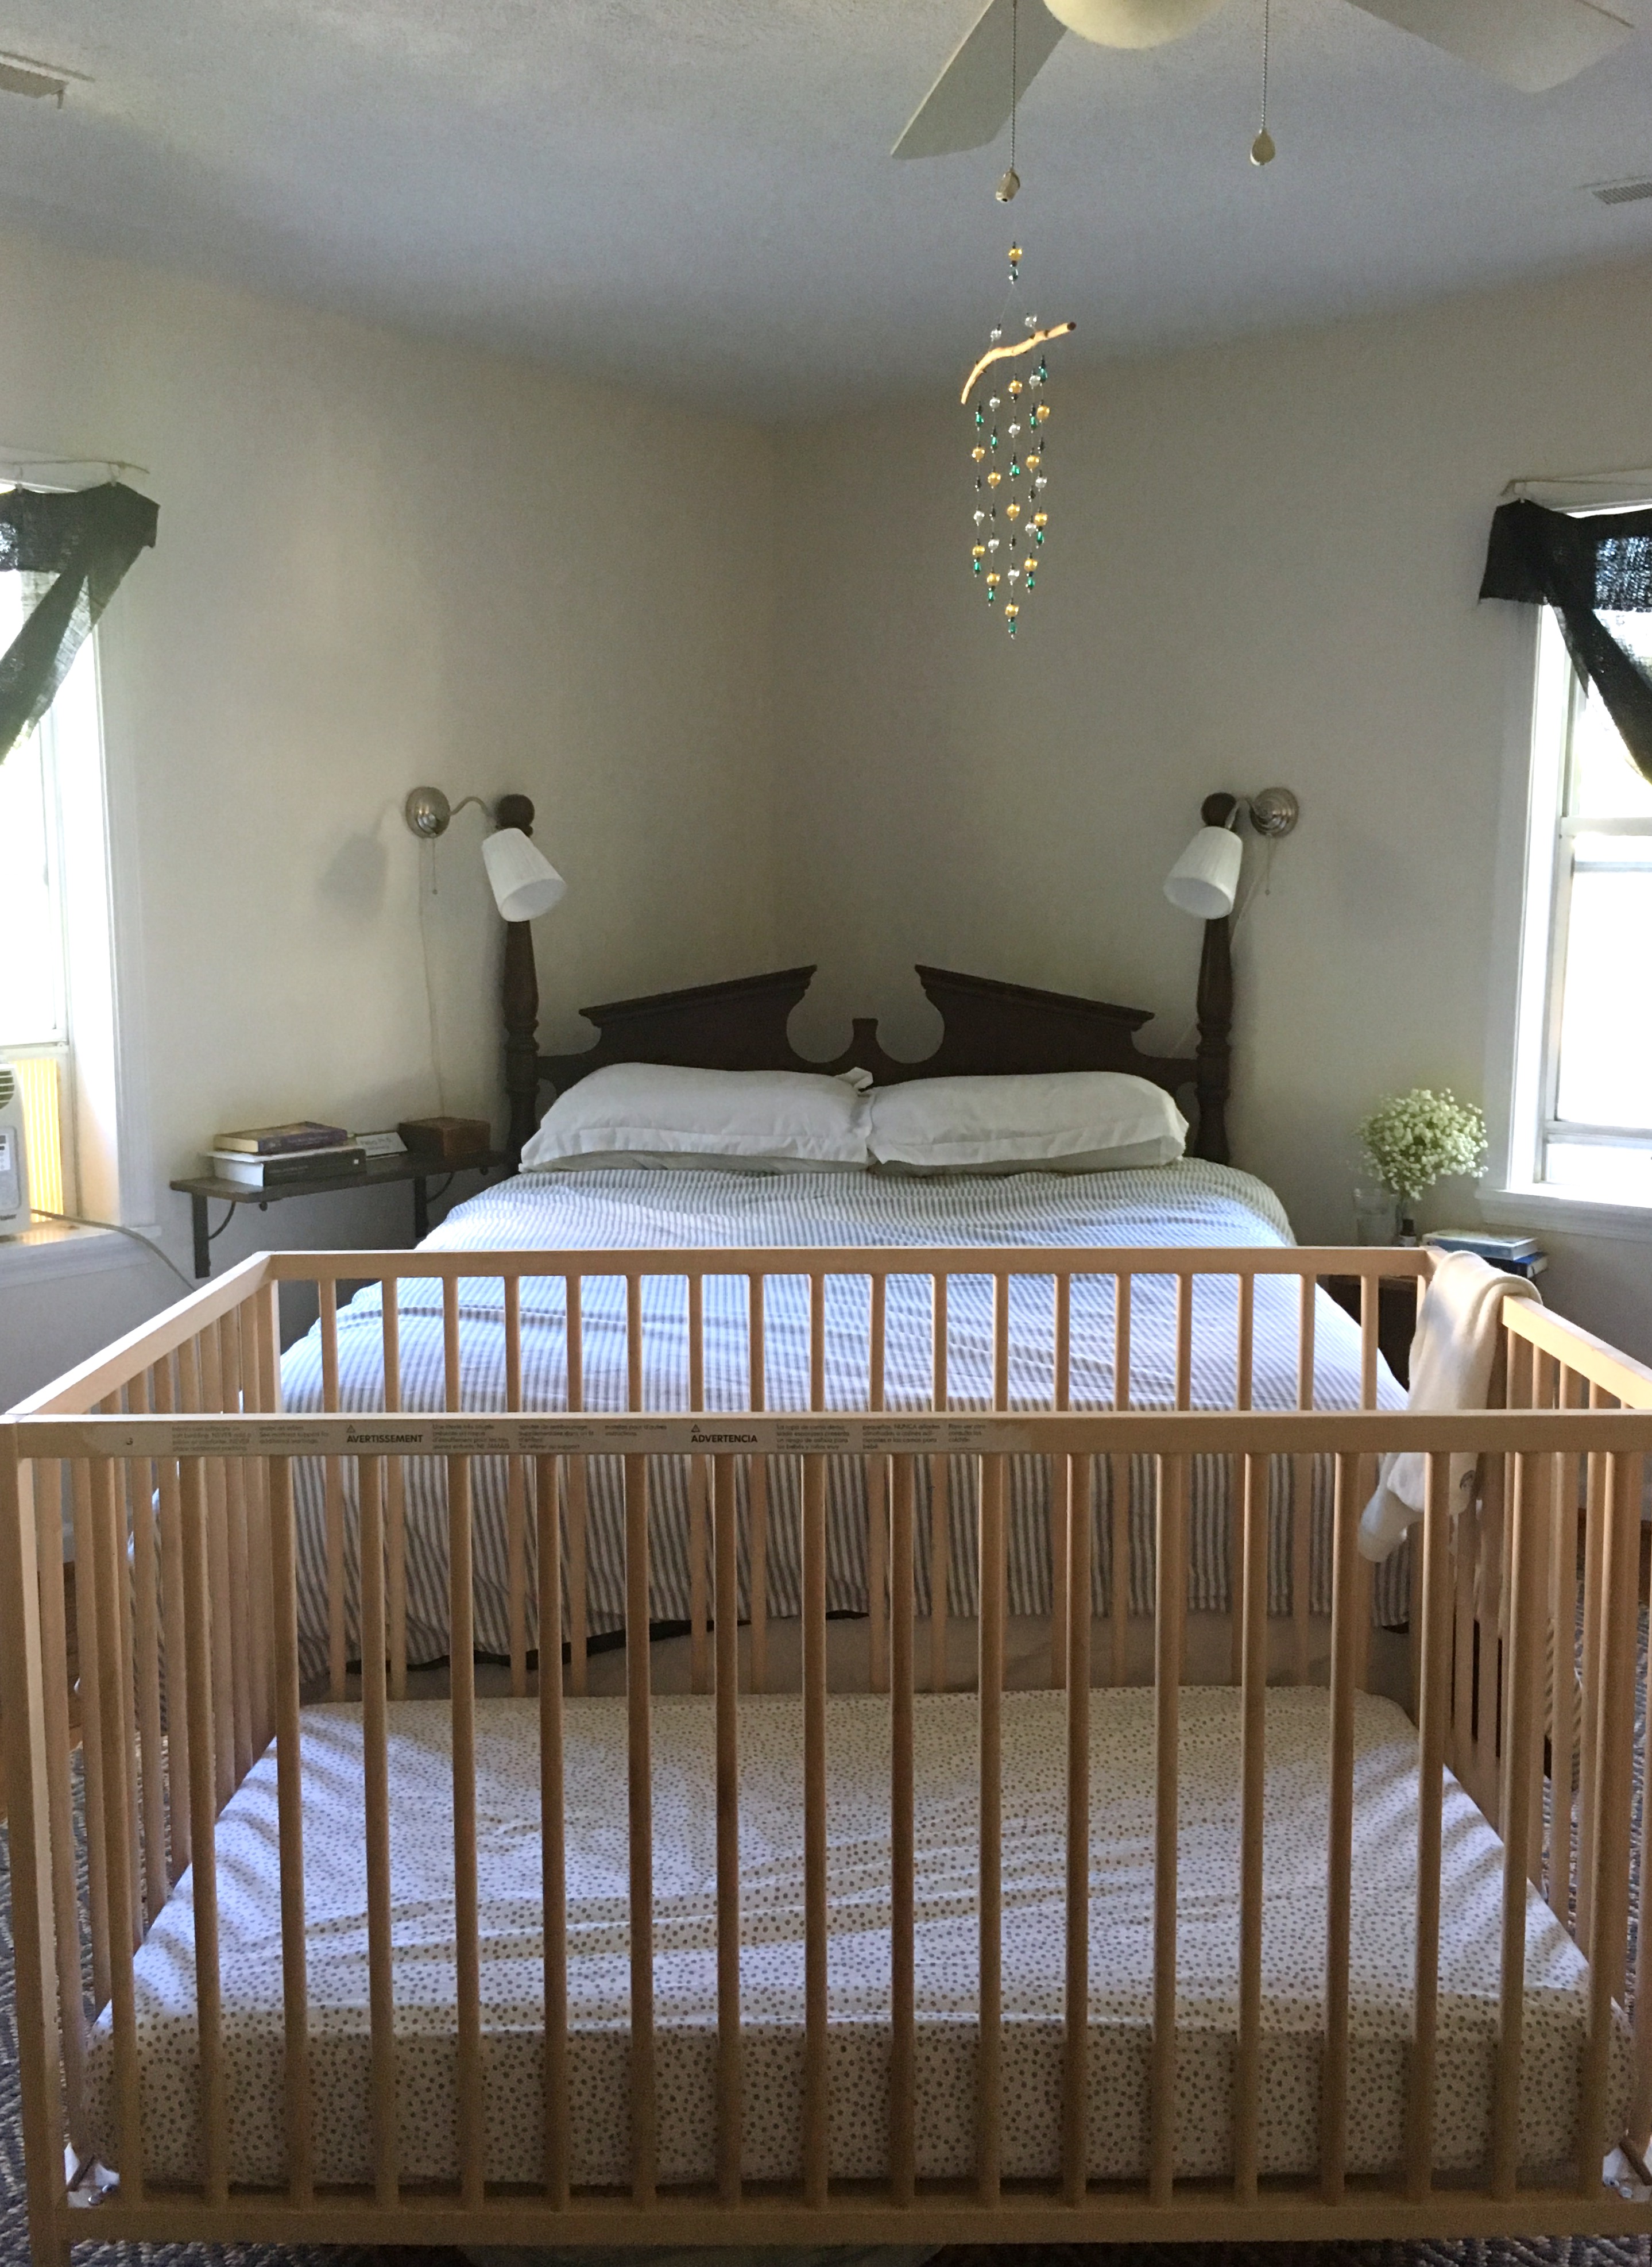 KatharineSchellman.com - tiny apartment sharing a bedroom with a baby